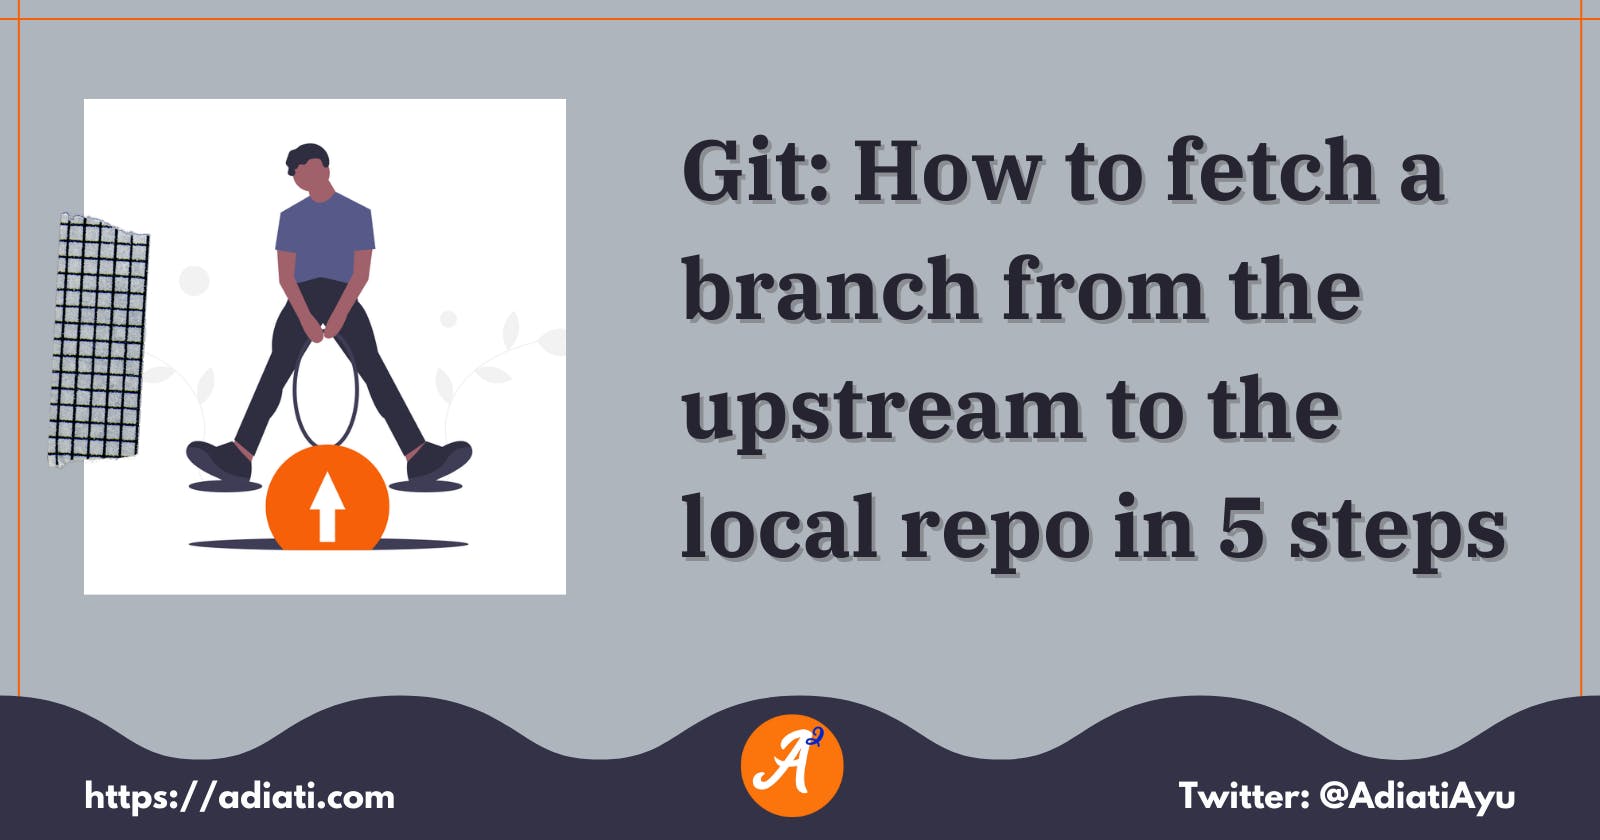 Git: How to fetch a branch from the upstream to the local repo in 5 steps